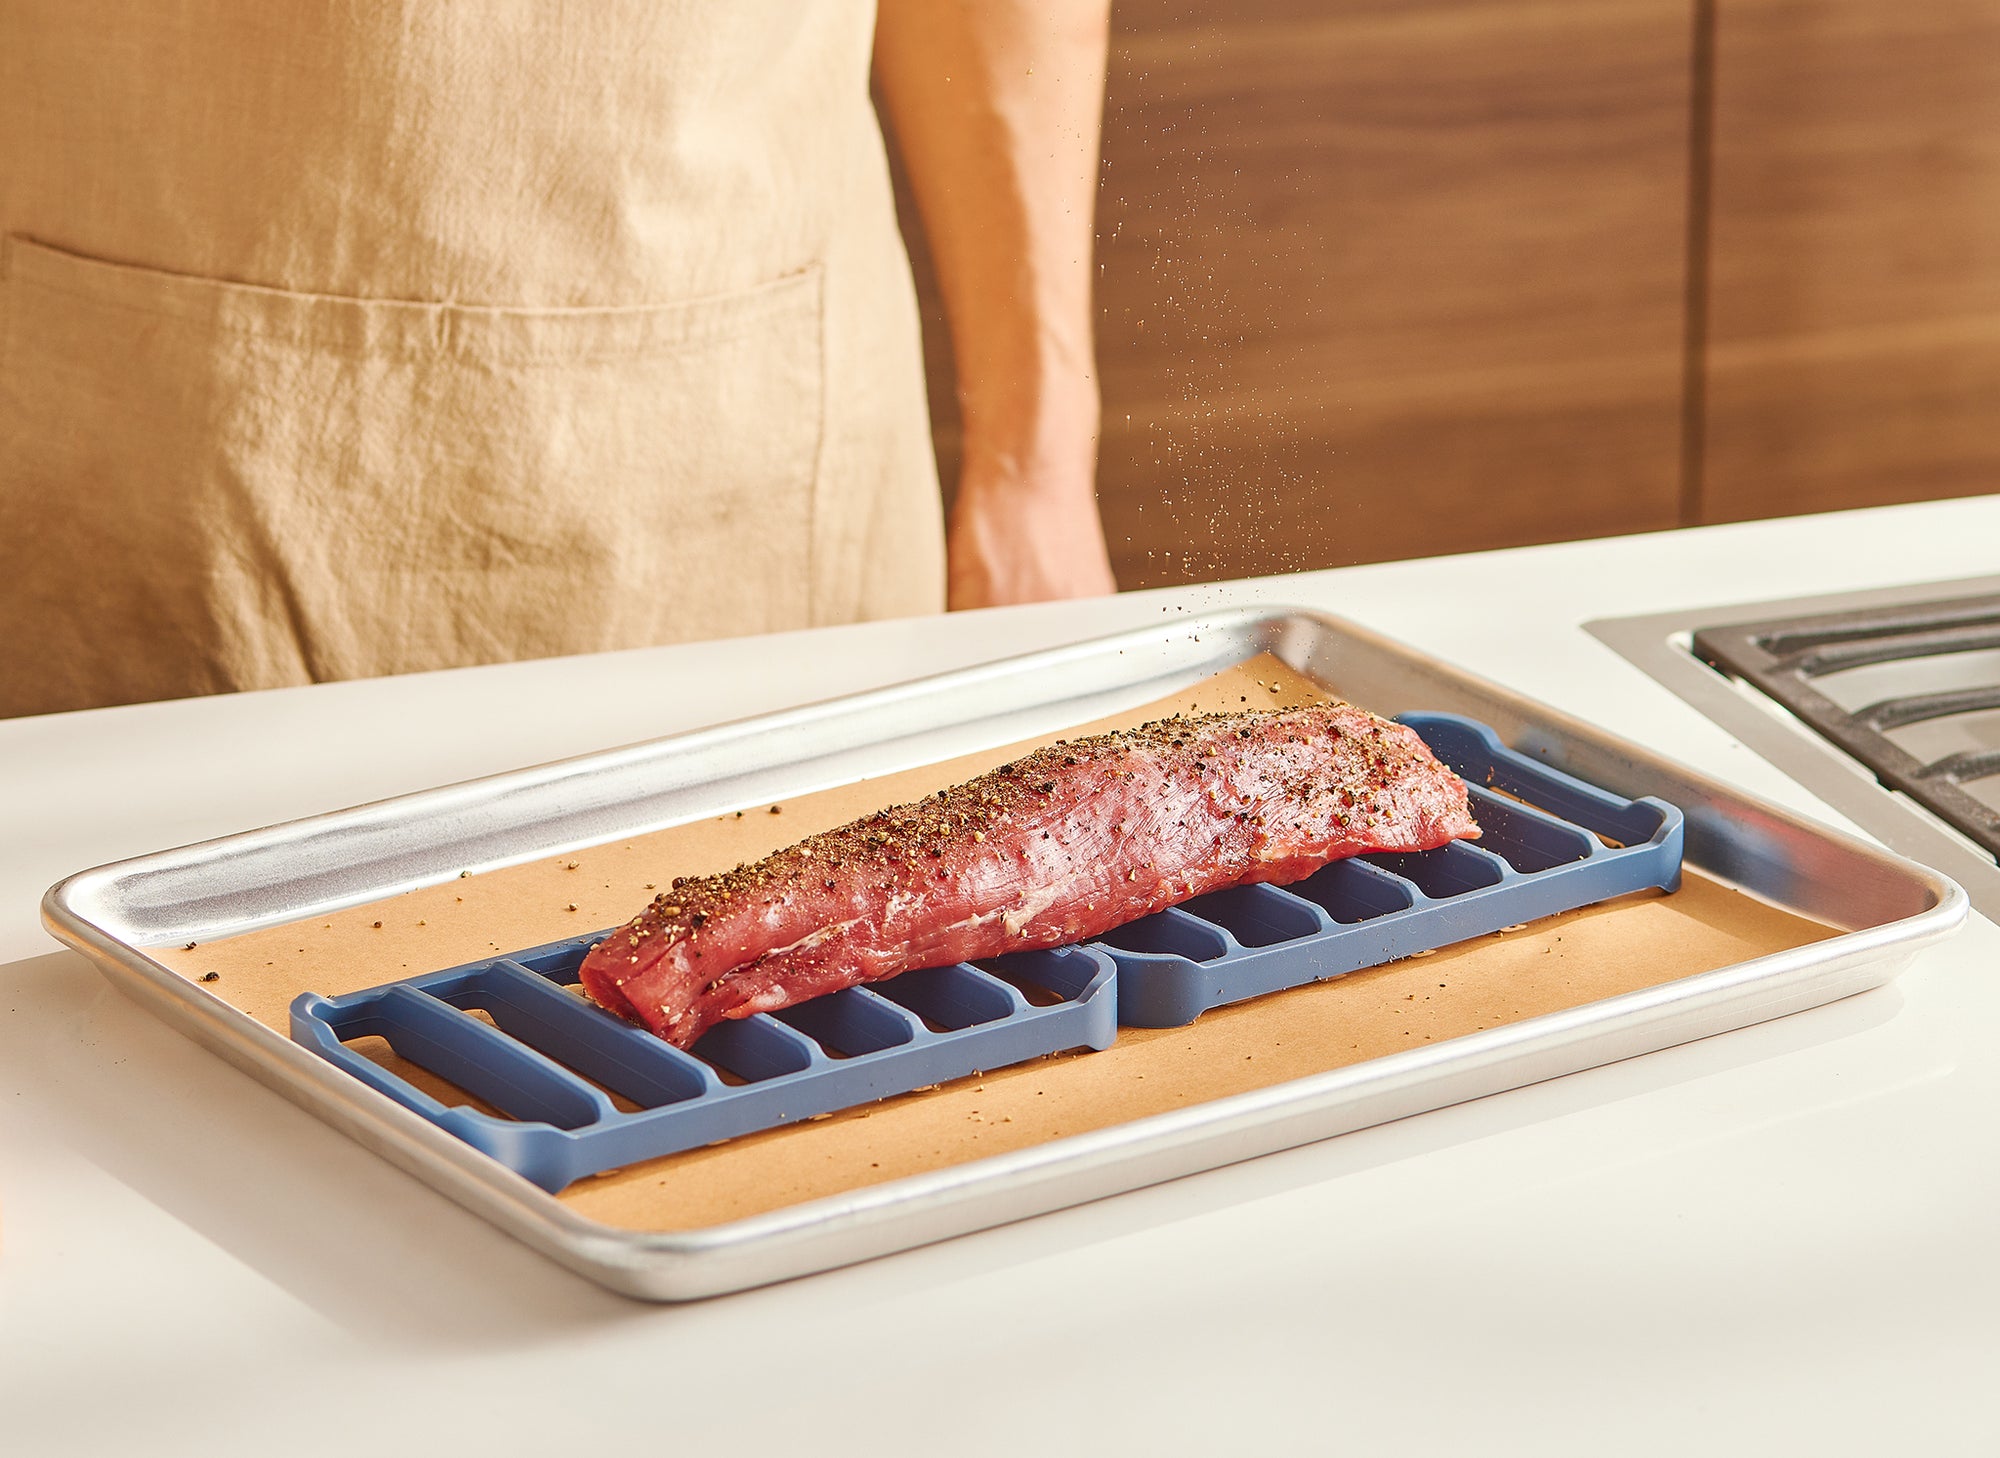 A chef seasons a pork loin, which is sitting atop two blue Misen Silicone Roasting Racks in a parchment paper-lined baking pan.